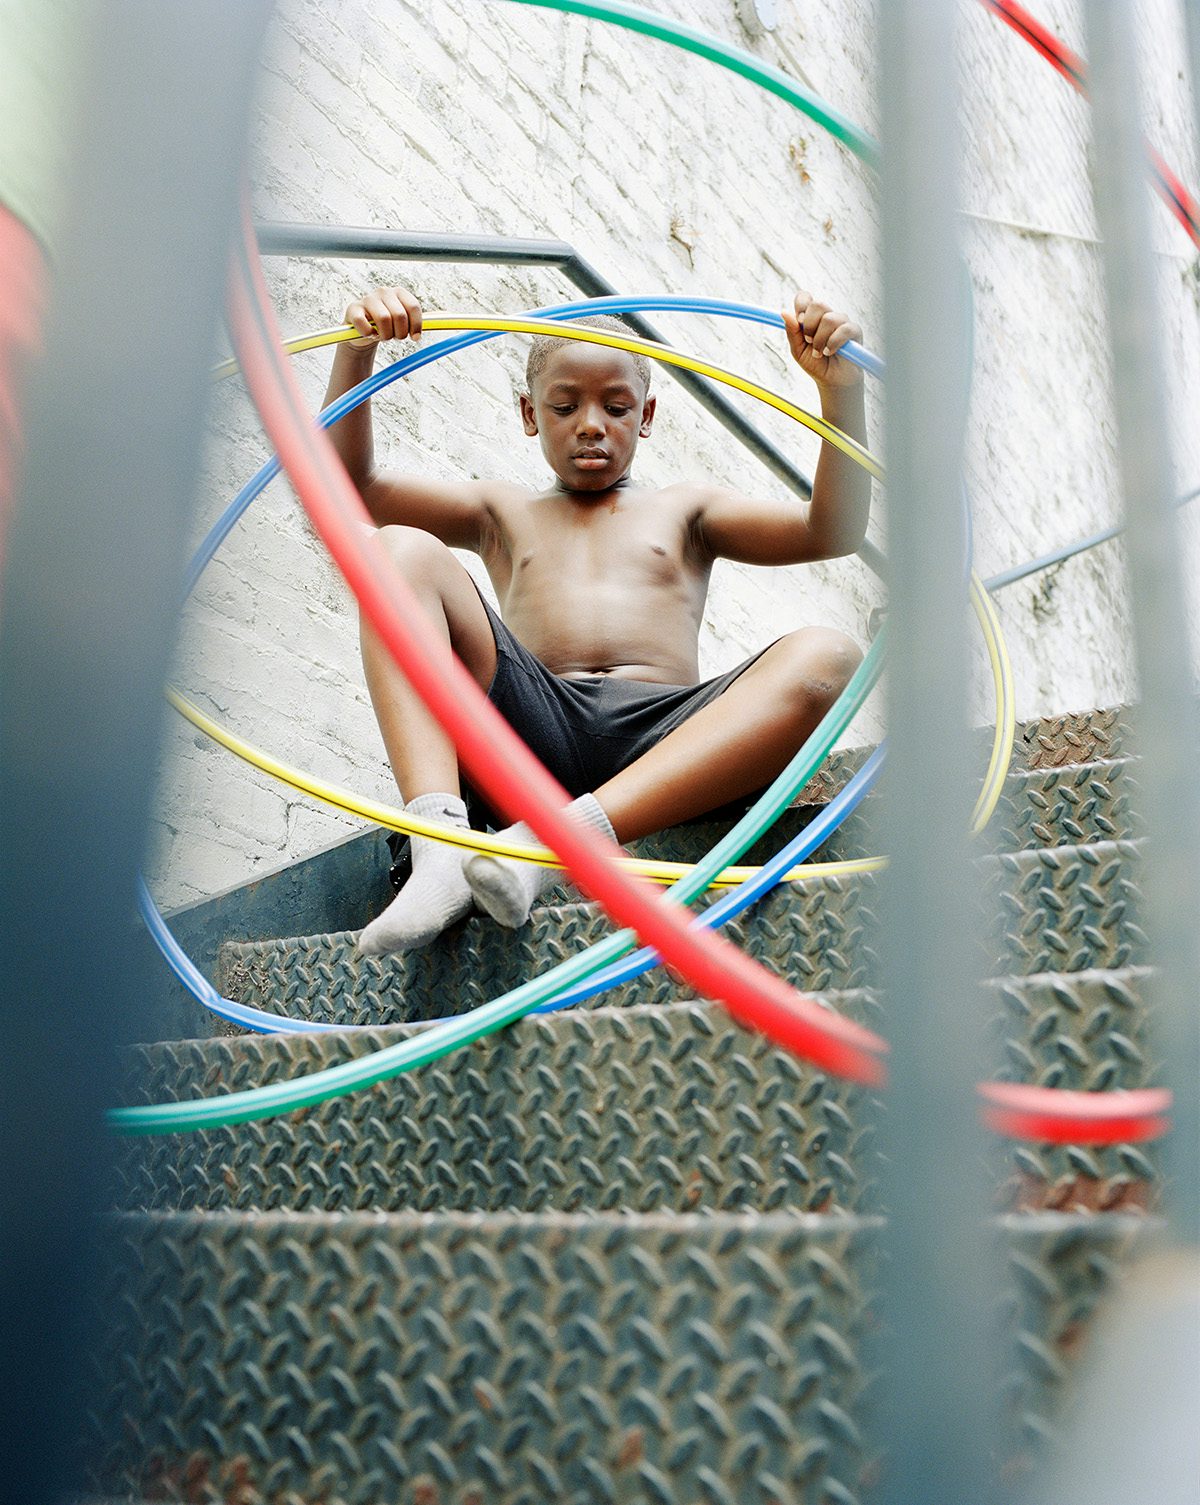 Photograph by Vasantha Yogananthan of a young person wearing shorts and socks, sat on a metal staircase with colourful hula hoops surrounding them. The scene is shot through the metal bars of the staircase which are visible in the frame